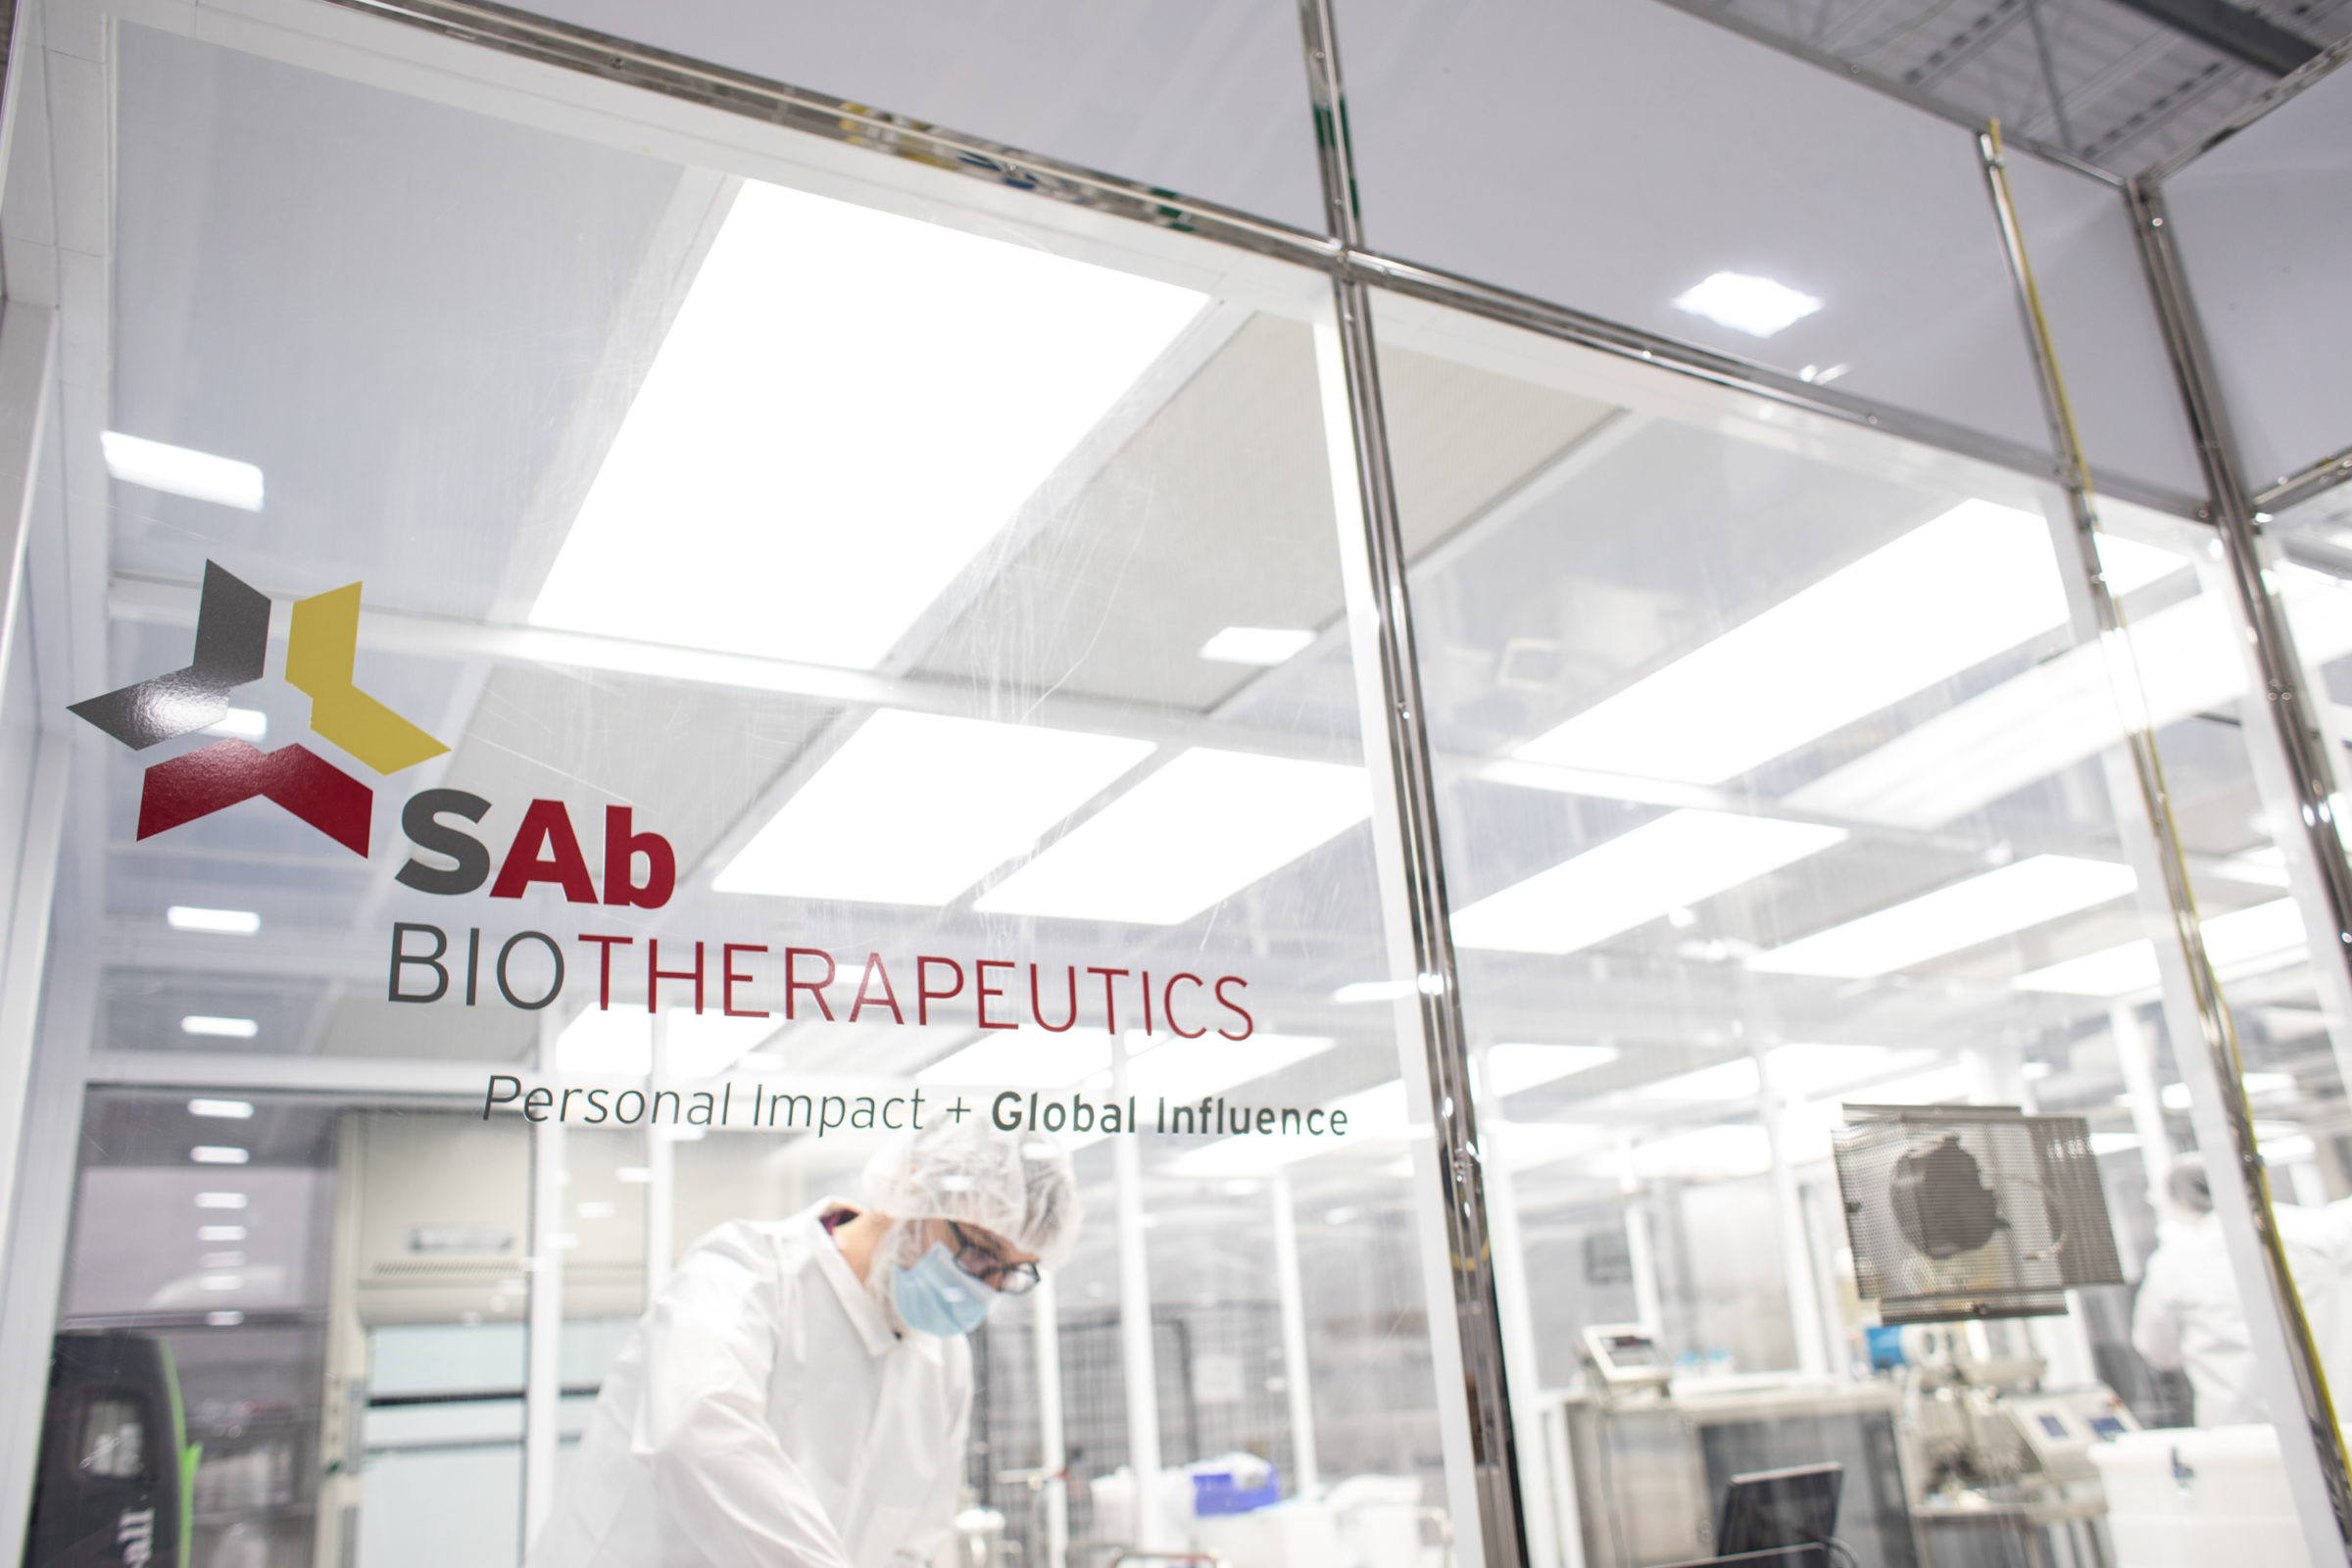 http://SAB%20Biotherapeutics%20Confirms%20Neutralizing%20Antibodies%20To%20SARS-CoV-2%20And%20Begins%20Clinical%20Manufacturing%20Of%20Novel%20COVID-19%20Therapeutic%20Candidate